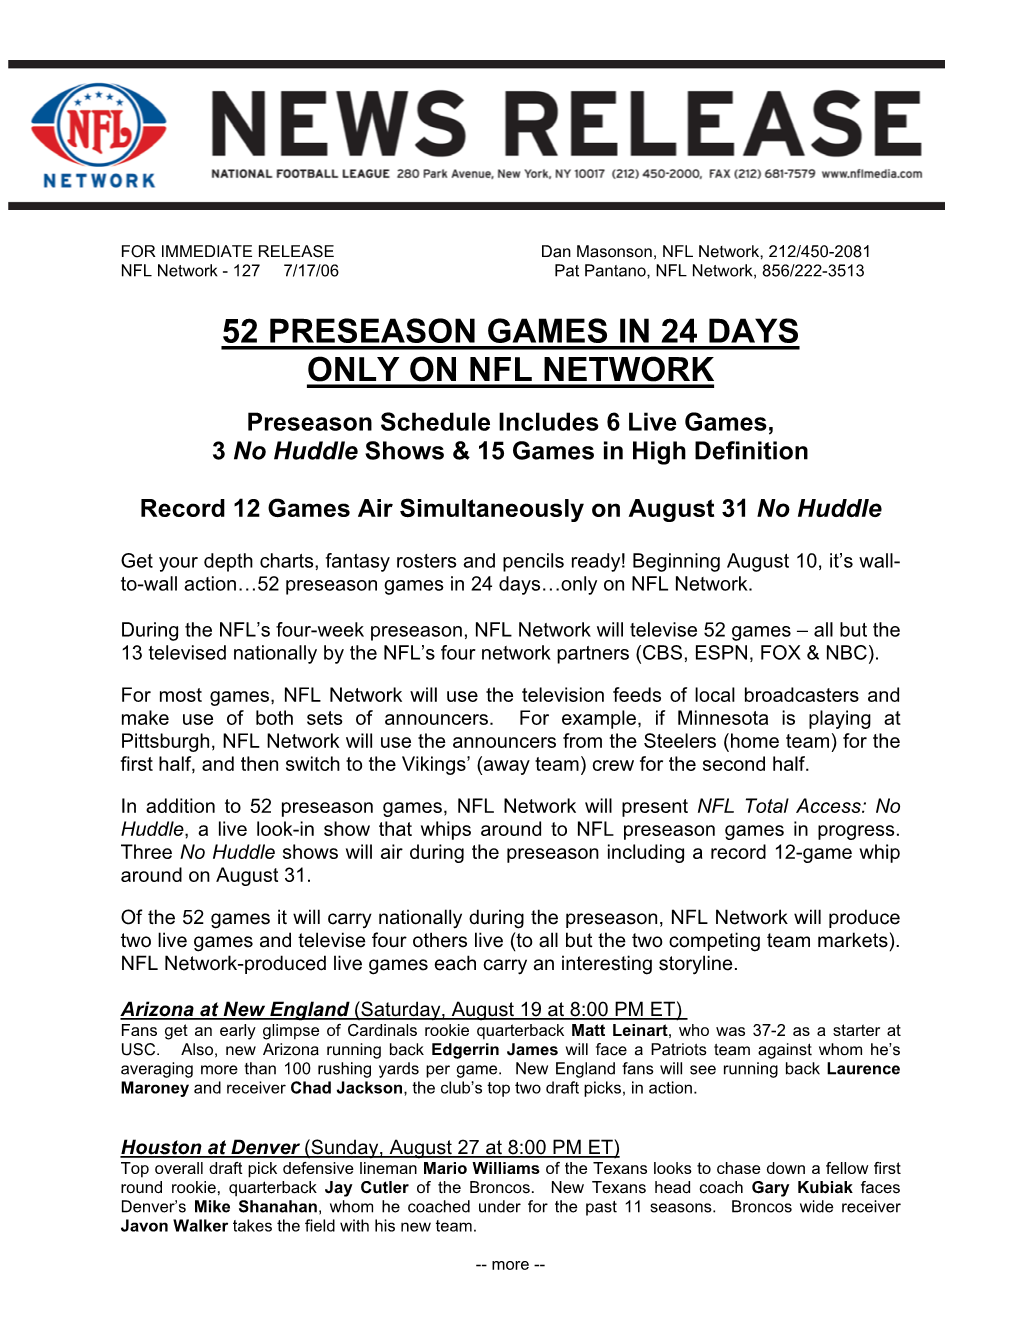 52 Preseason Games in 24 Days Only on Nfl Network